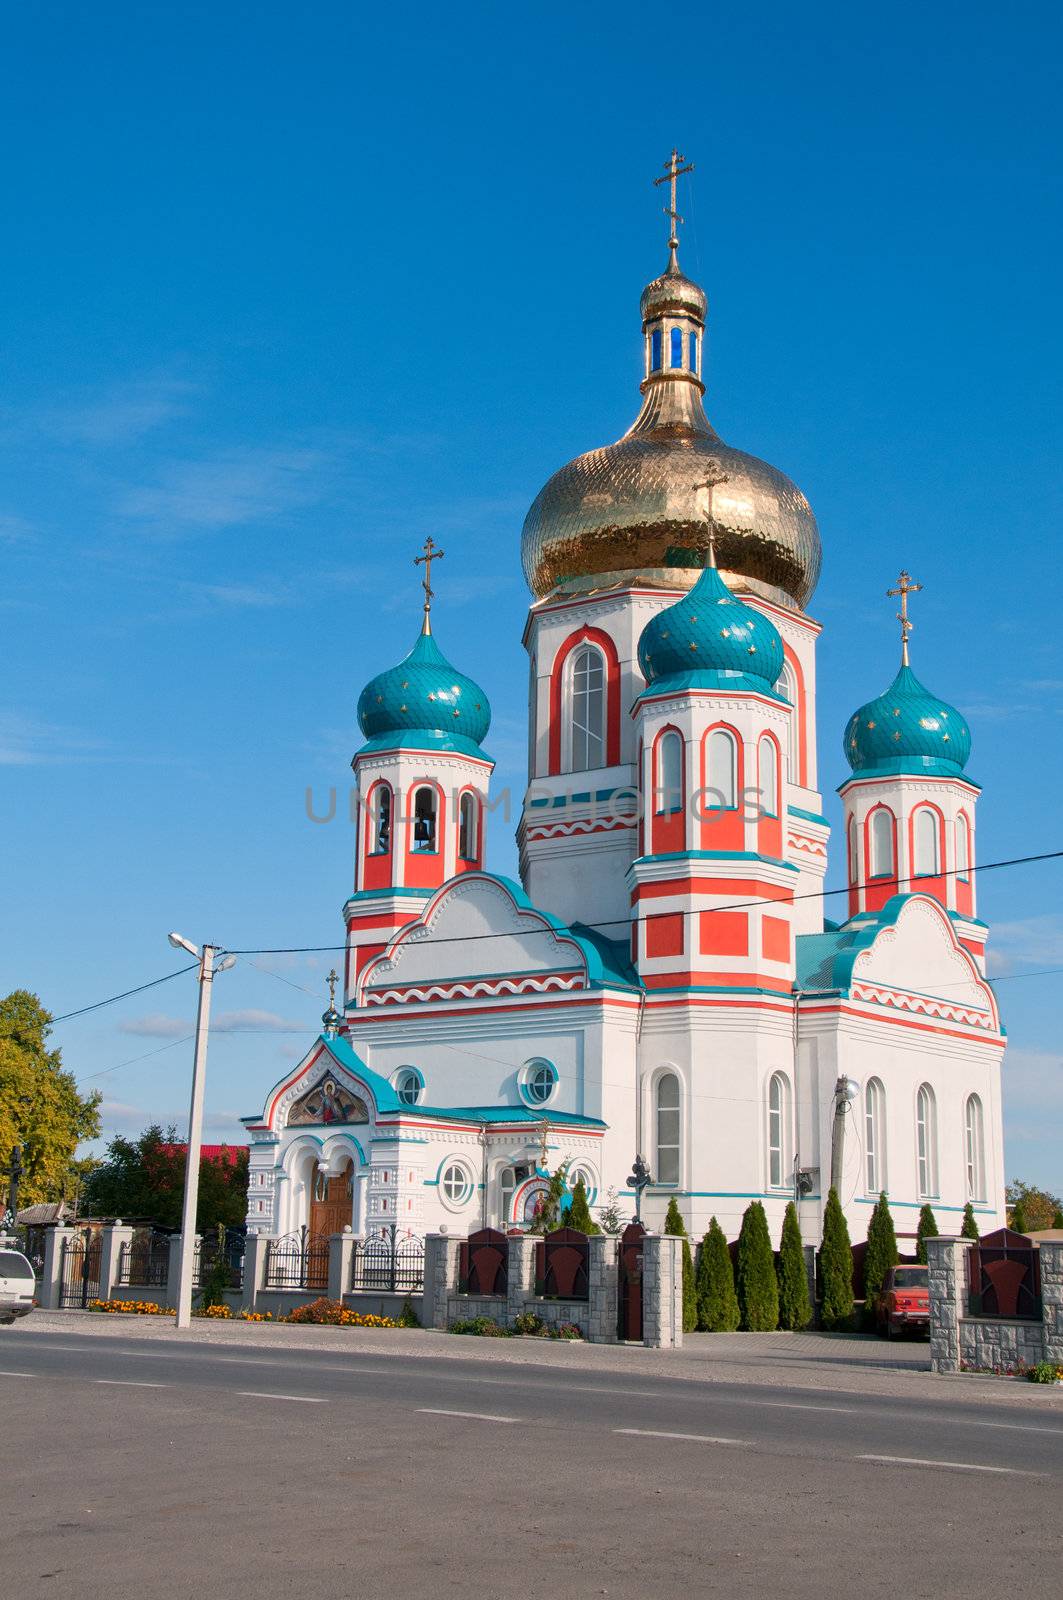 The Orthodox Church recently built in a small town